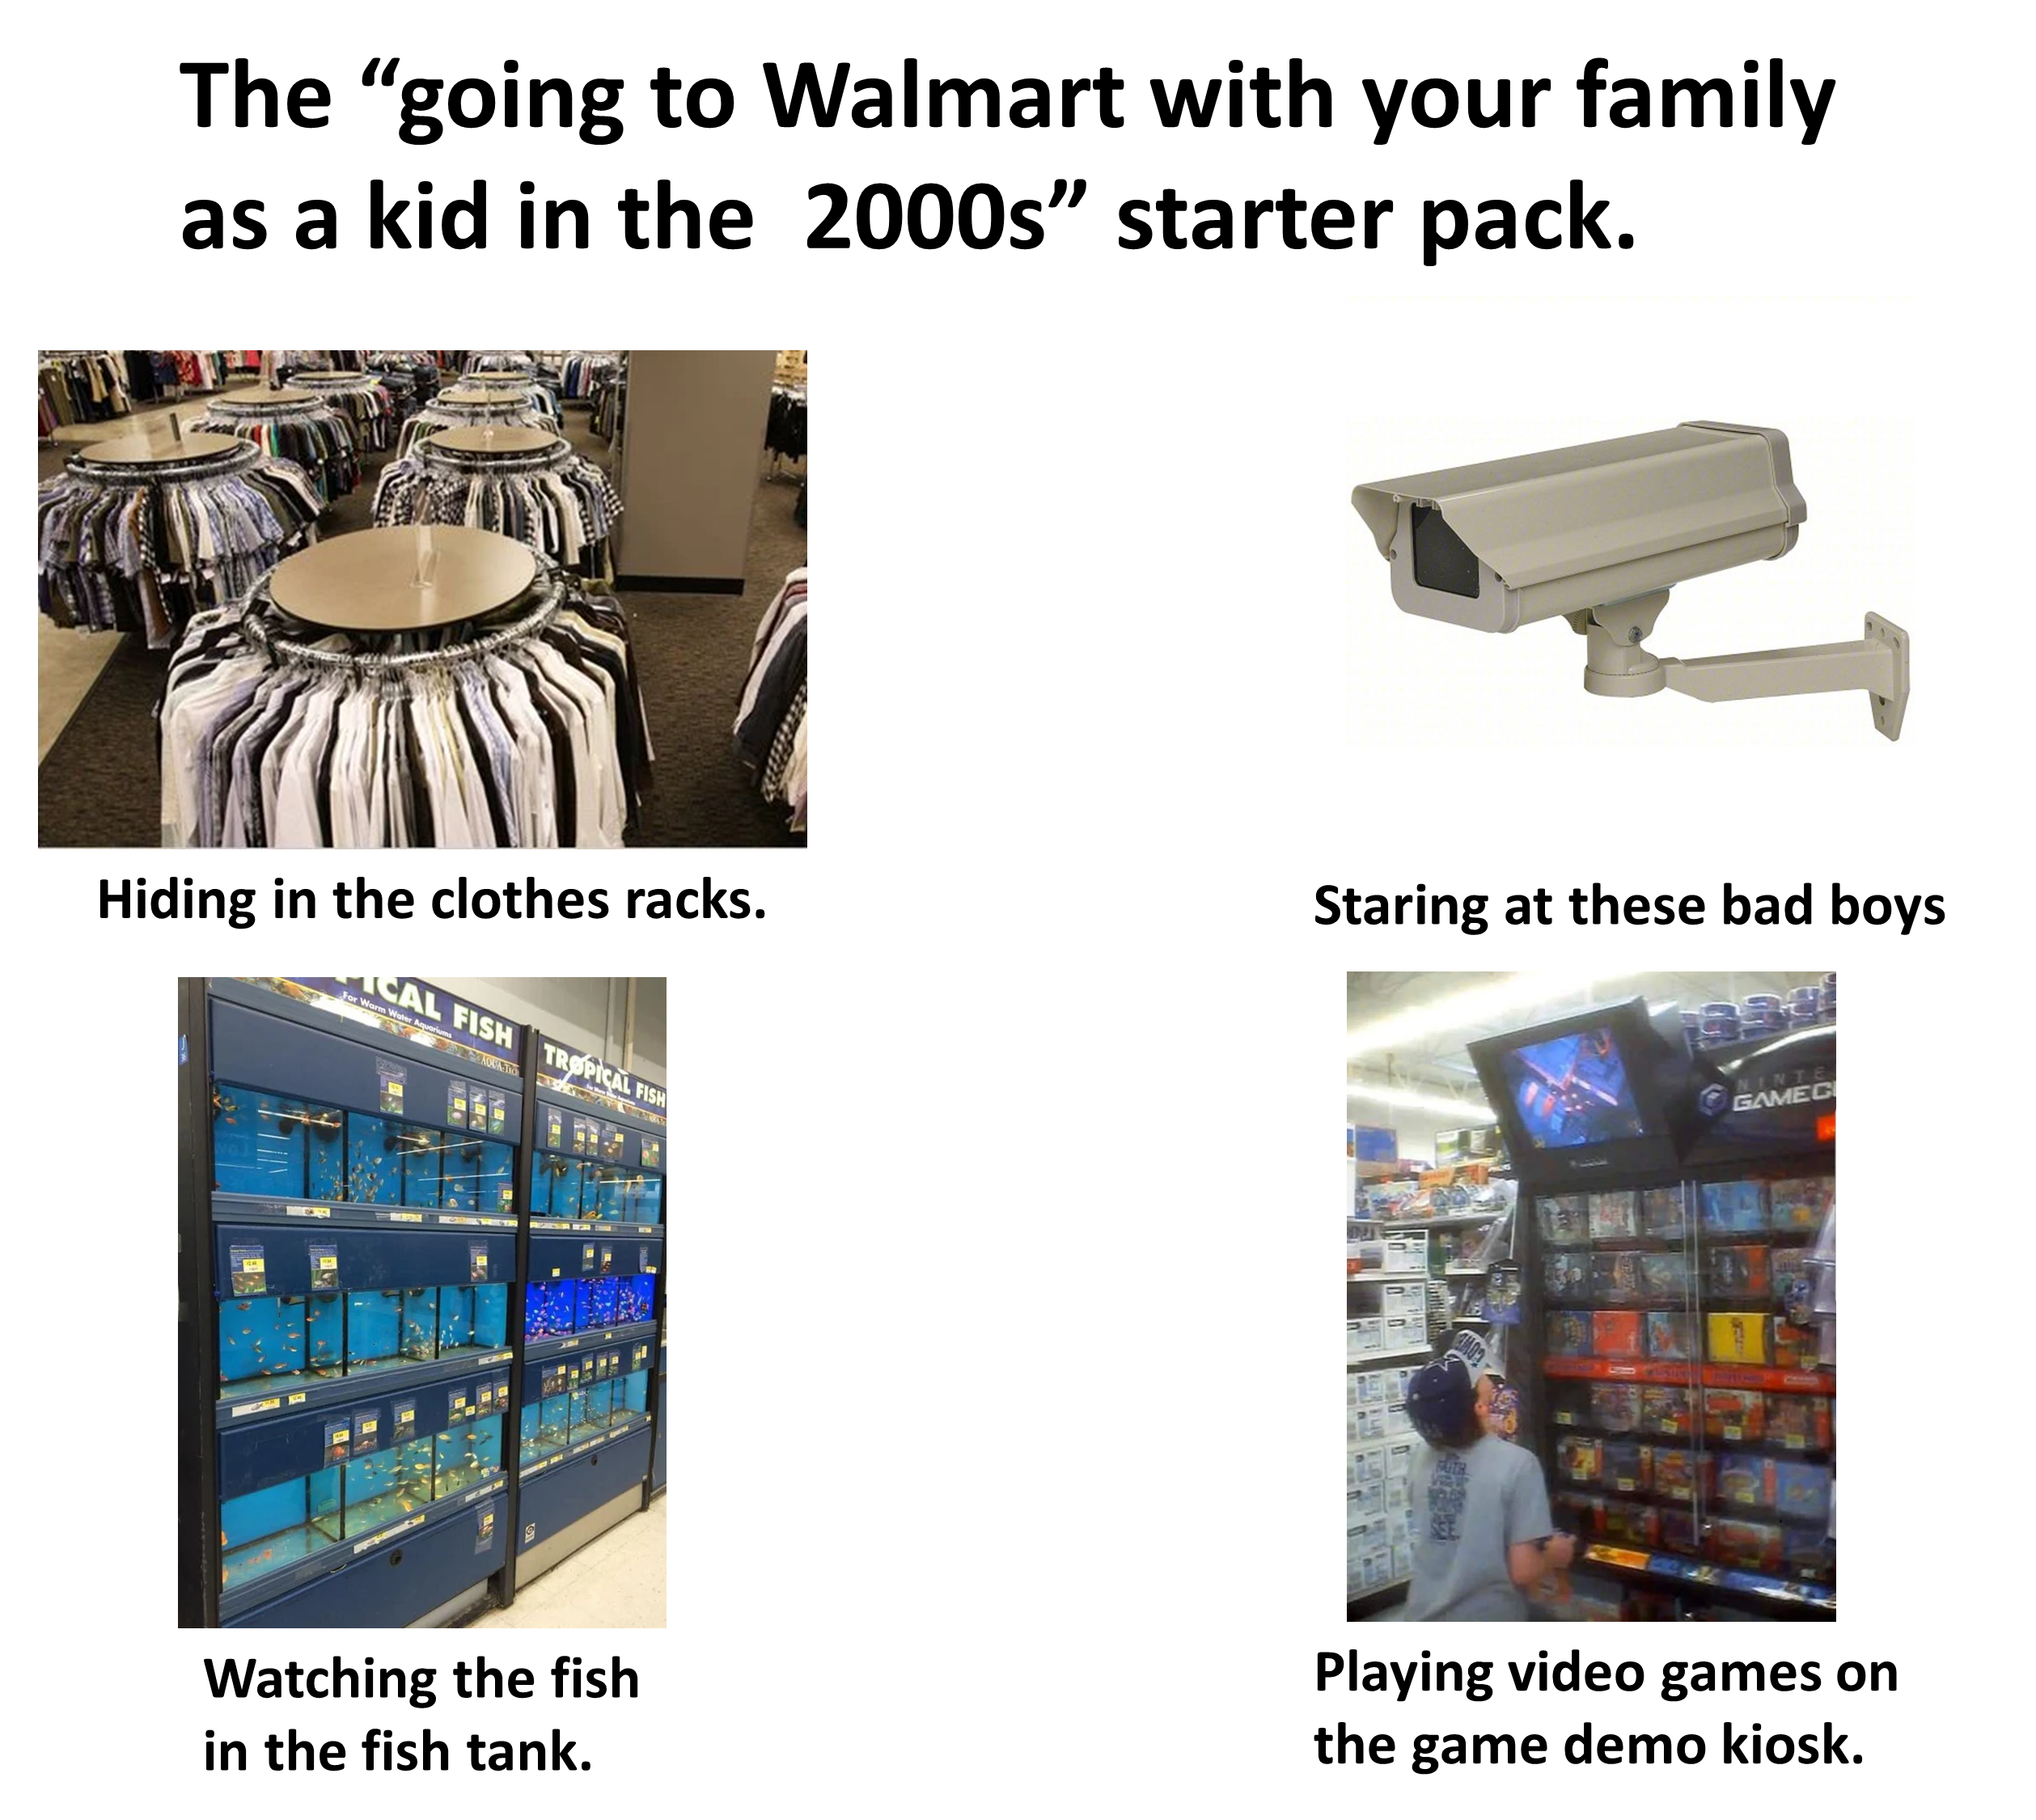 funny memes - plastic - The "going to Walmart with your family as a kid in the 2000s" starter pack. Hiding in the clothes racks. Watching the fish in the fish tank. 2 Staring at these bad boys Playing video games on the game demo kiosk.